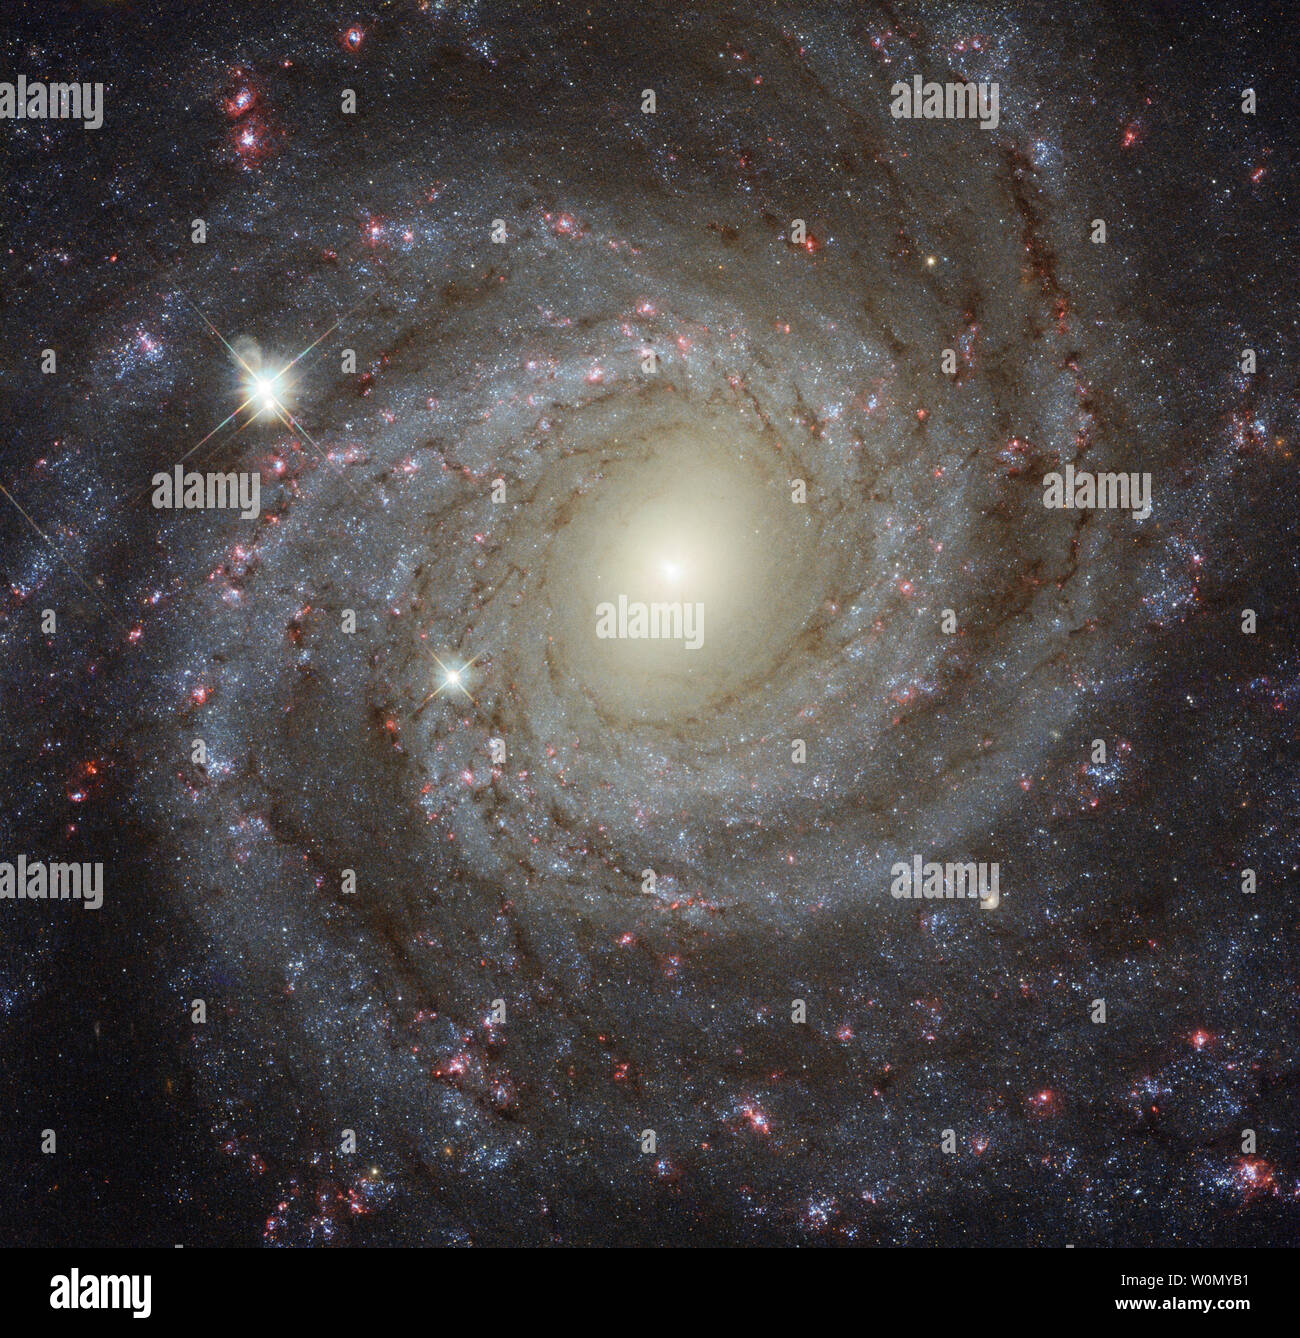 This image, released on February 14, 2018, of the spiral galaxy NGC 3344, located about 20 million light-years from Earth, is a composite of images taken through seven different filters. They cover wavelengths from the ultraviolet to the optical and the near-infrared. Together they create a detailed picture of the galaxy and allow astronomers to study many different aspects of it. Beauty, grace, mystery - this magnificent spiral galaxy has all the qualities of a perfect galactic Valentine. Captured by the NASA/ESA Hubble Space Telescope, the galaxy NGC 3344 presents itself face-on, allowing as Stock Photo